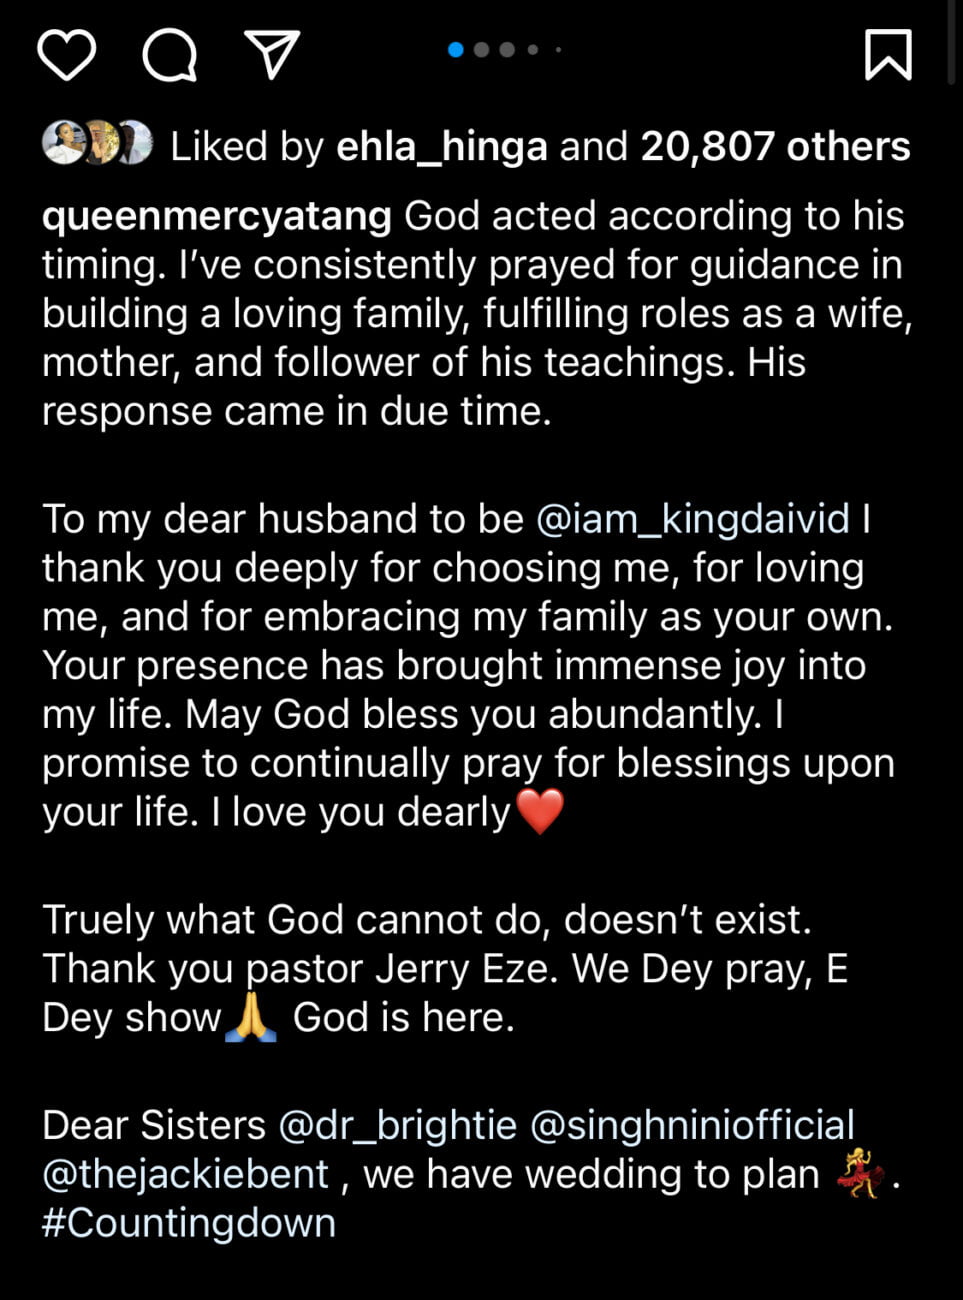 Queen Mercy Atang’s post announcing her engagement.